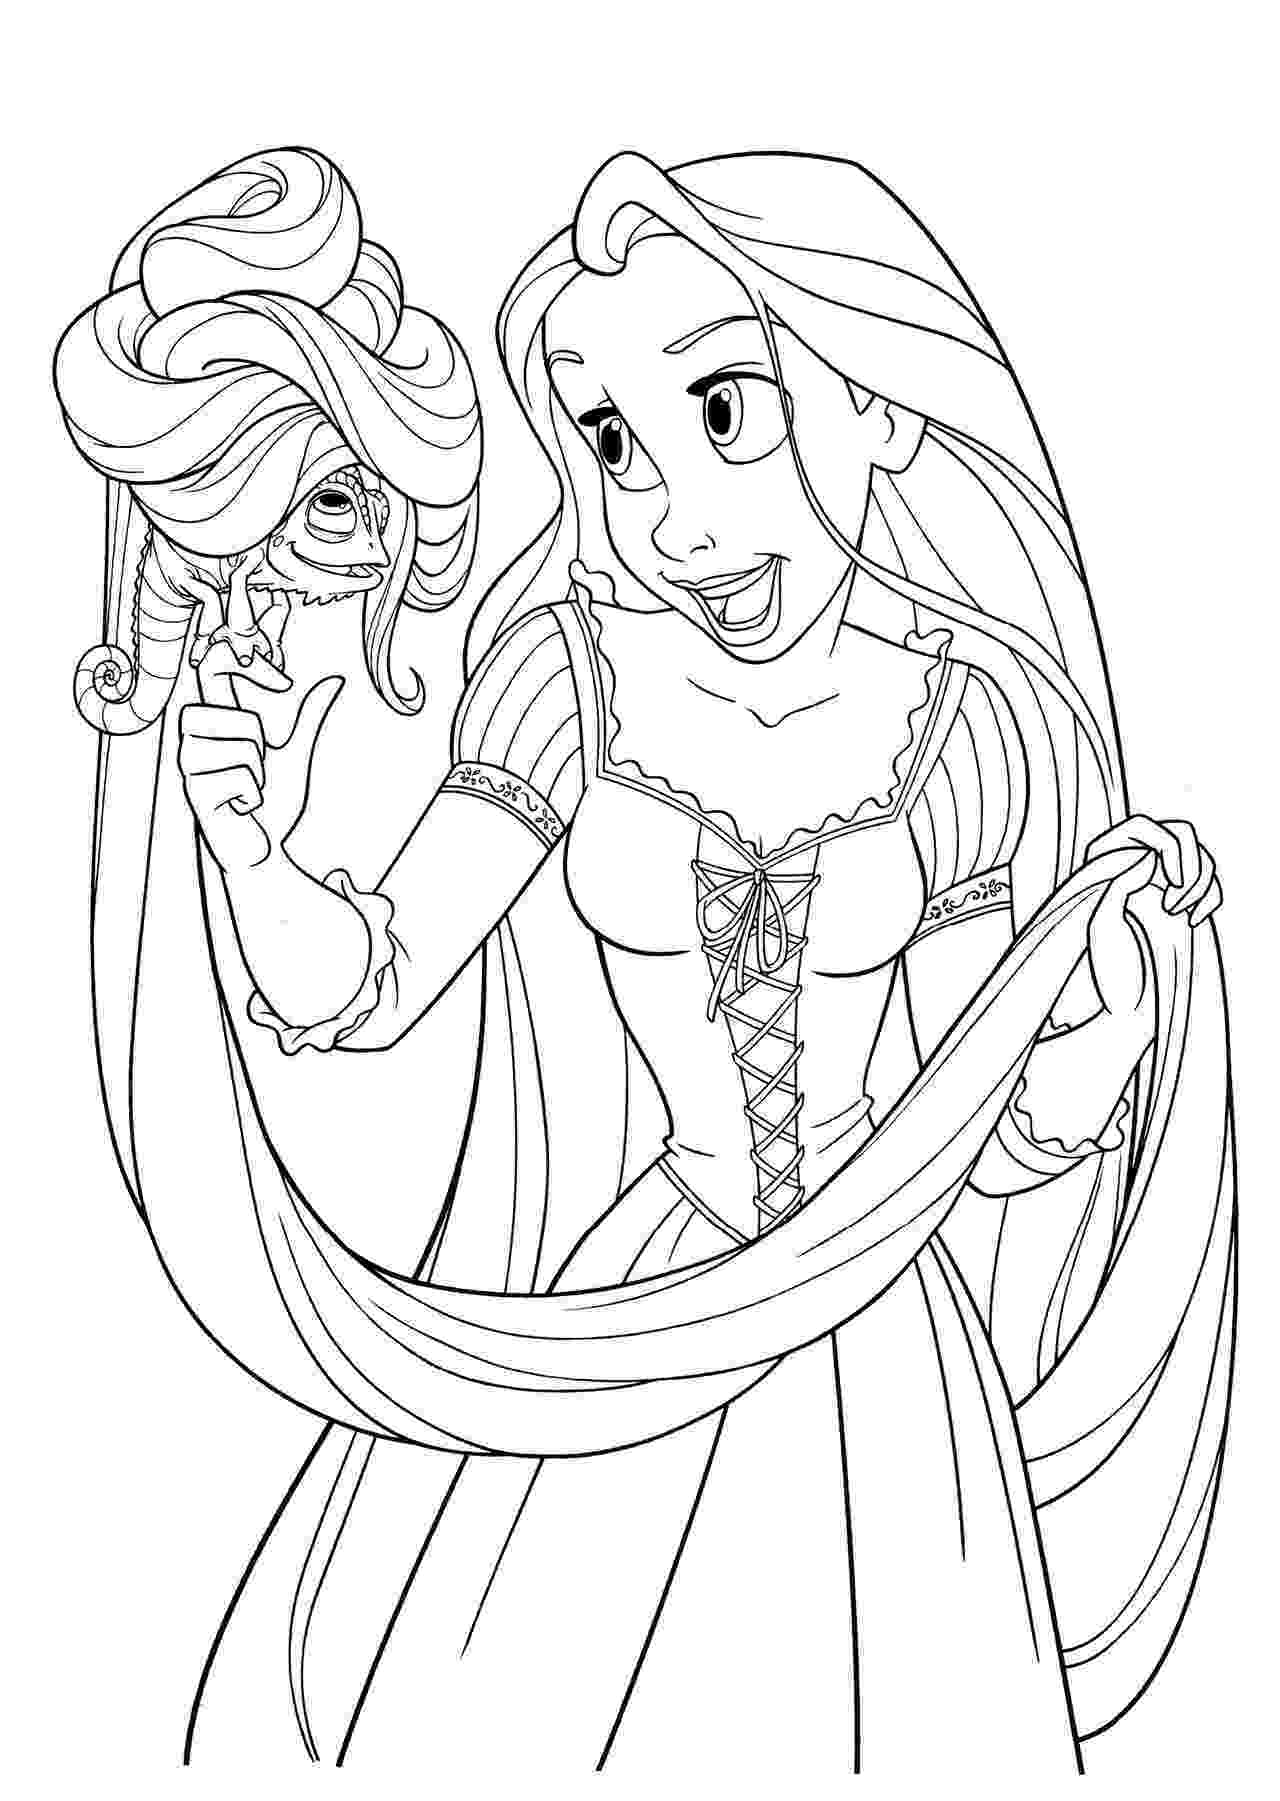 disney tangled coloring pages rapunzel tangled coloring pages best gift ideas blog coloring disney pages tangled 